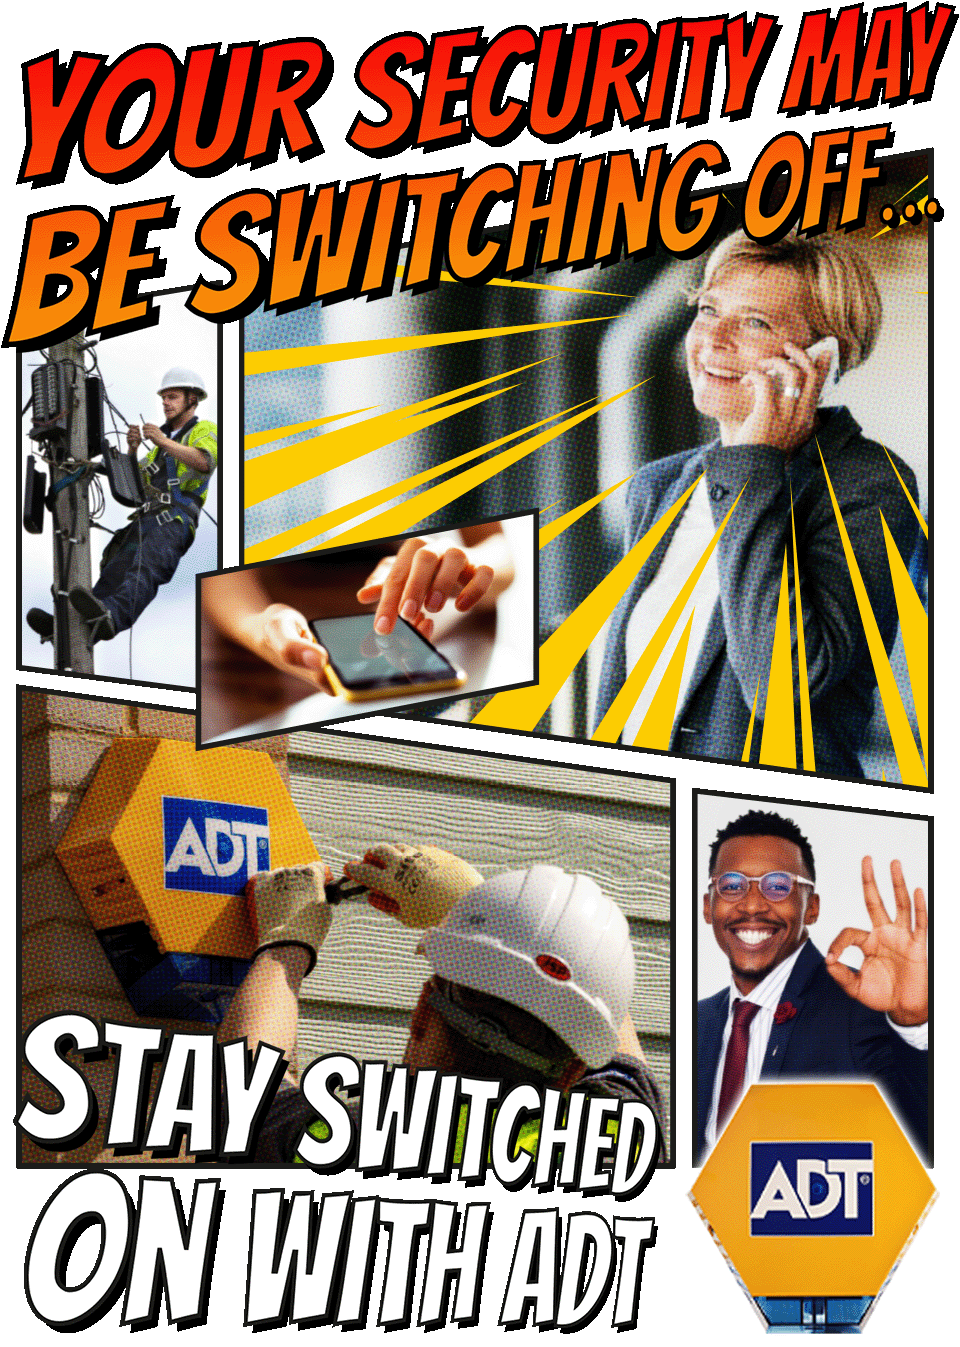 Comic book graphic with text, 'Your security map be switching off…Stay switched on with ADT'